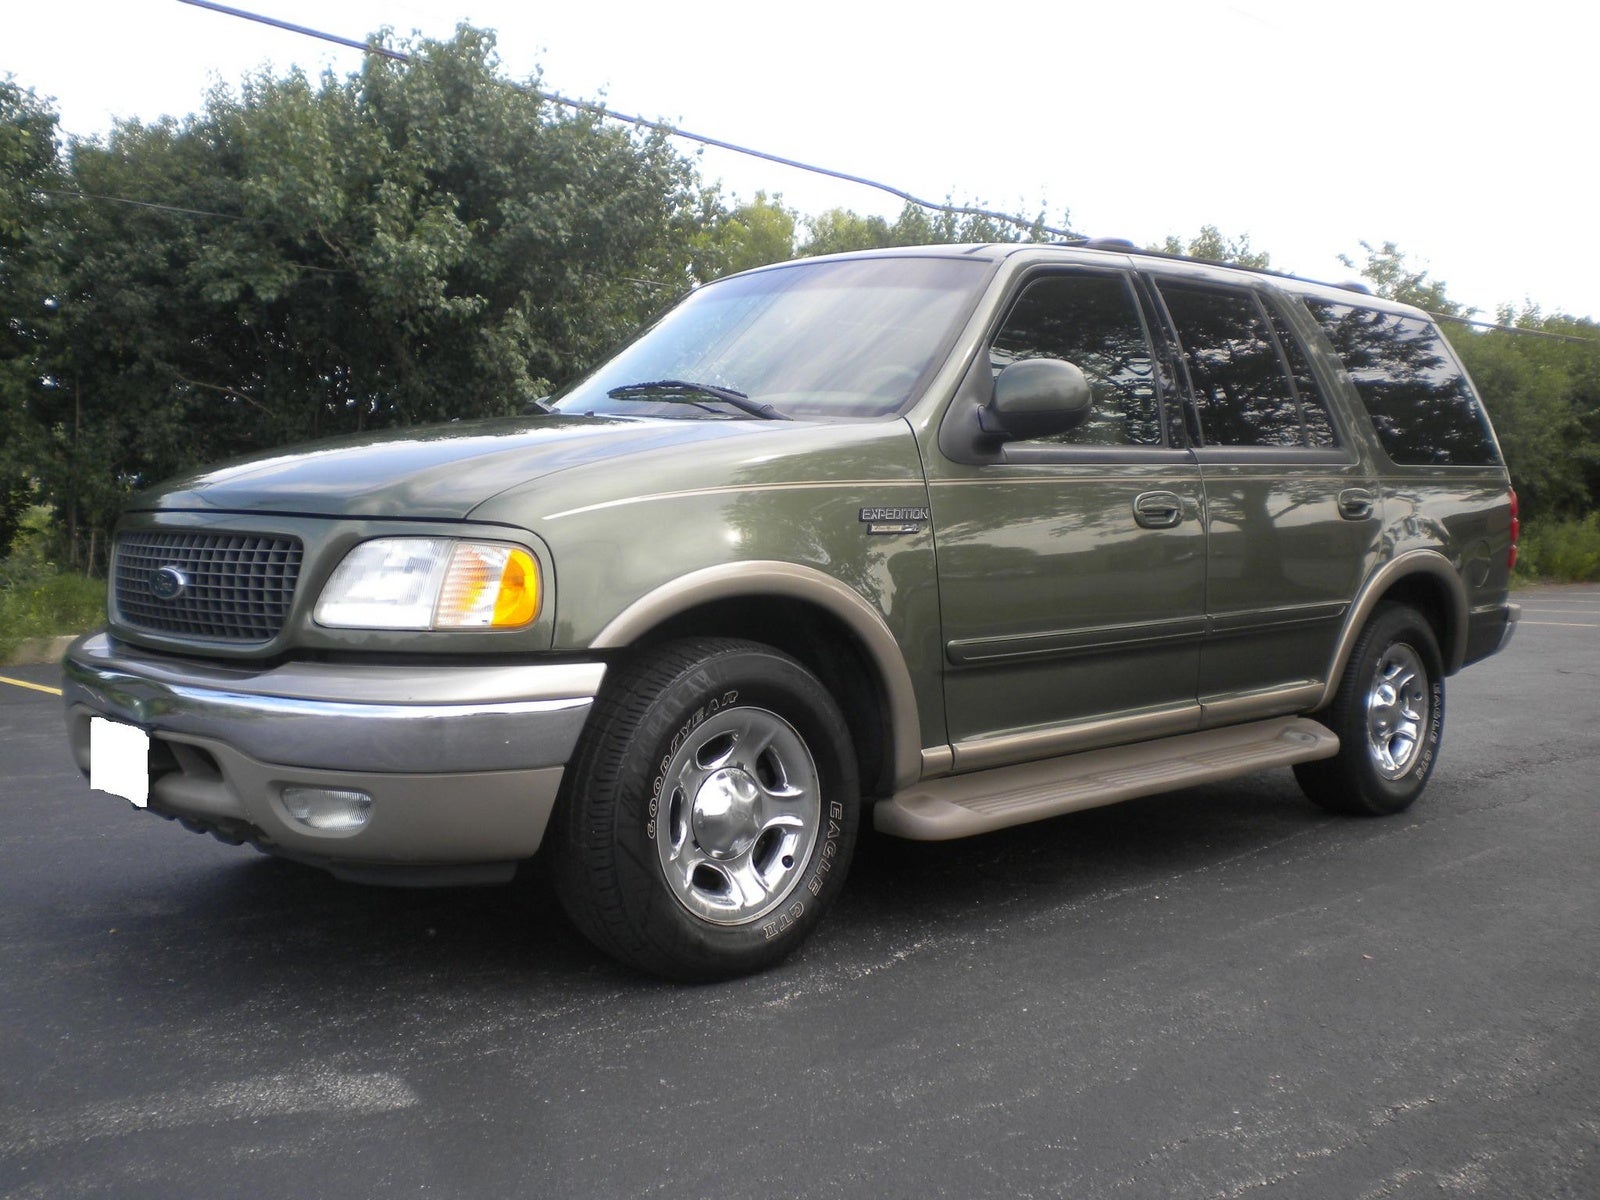 2000 Ford Expedition Problems Online Manuals And Repair Information 